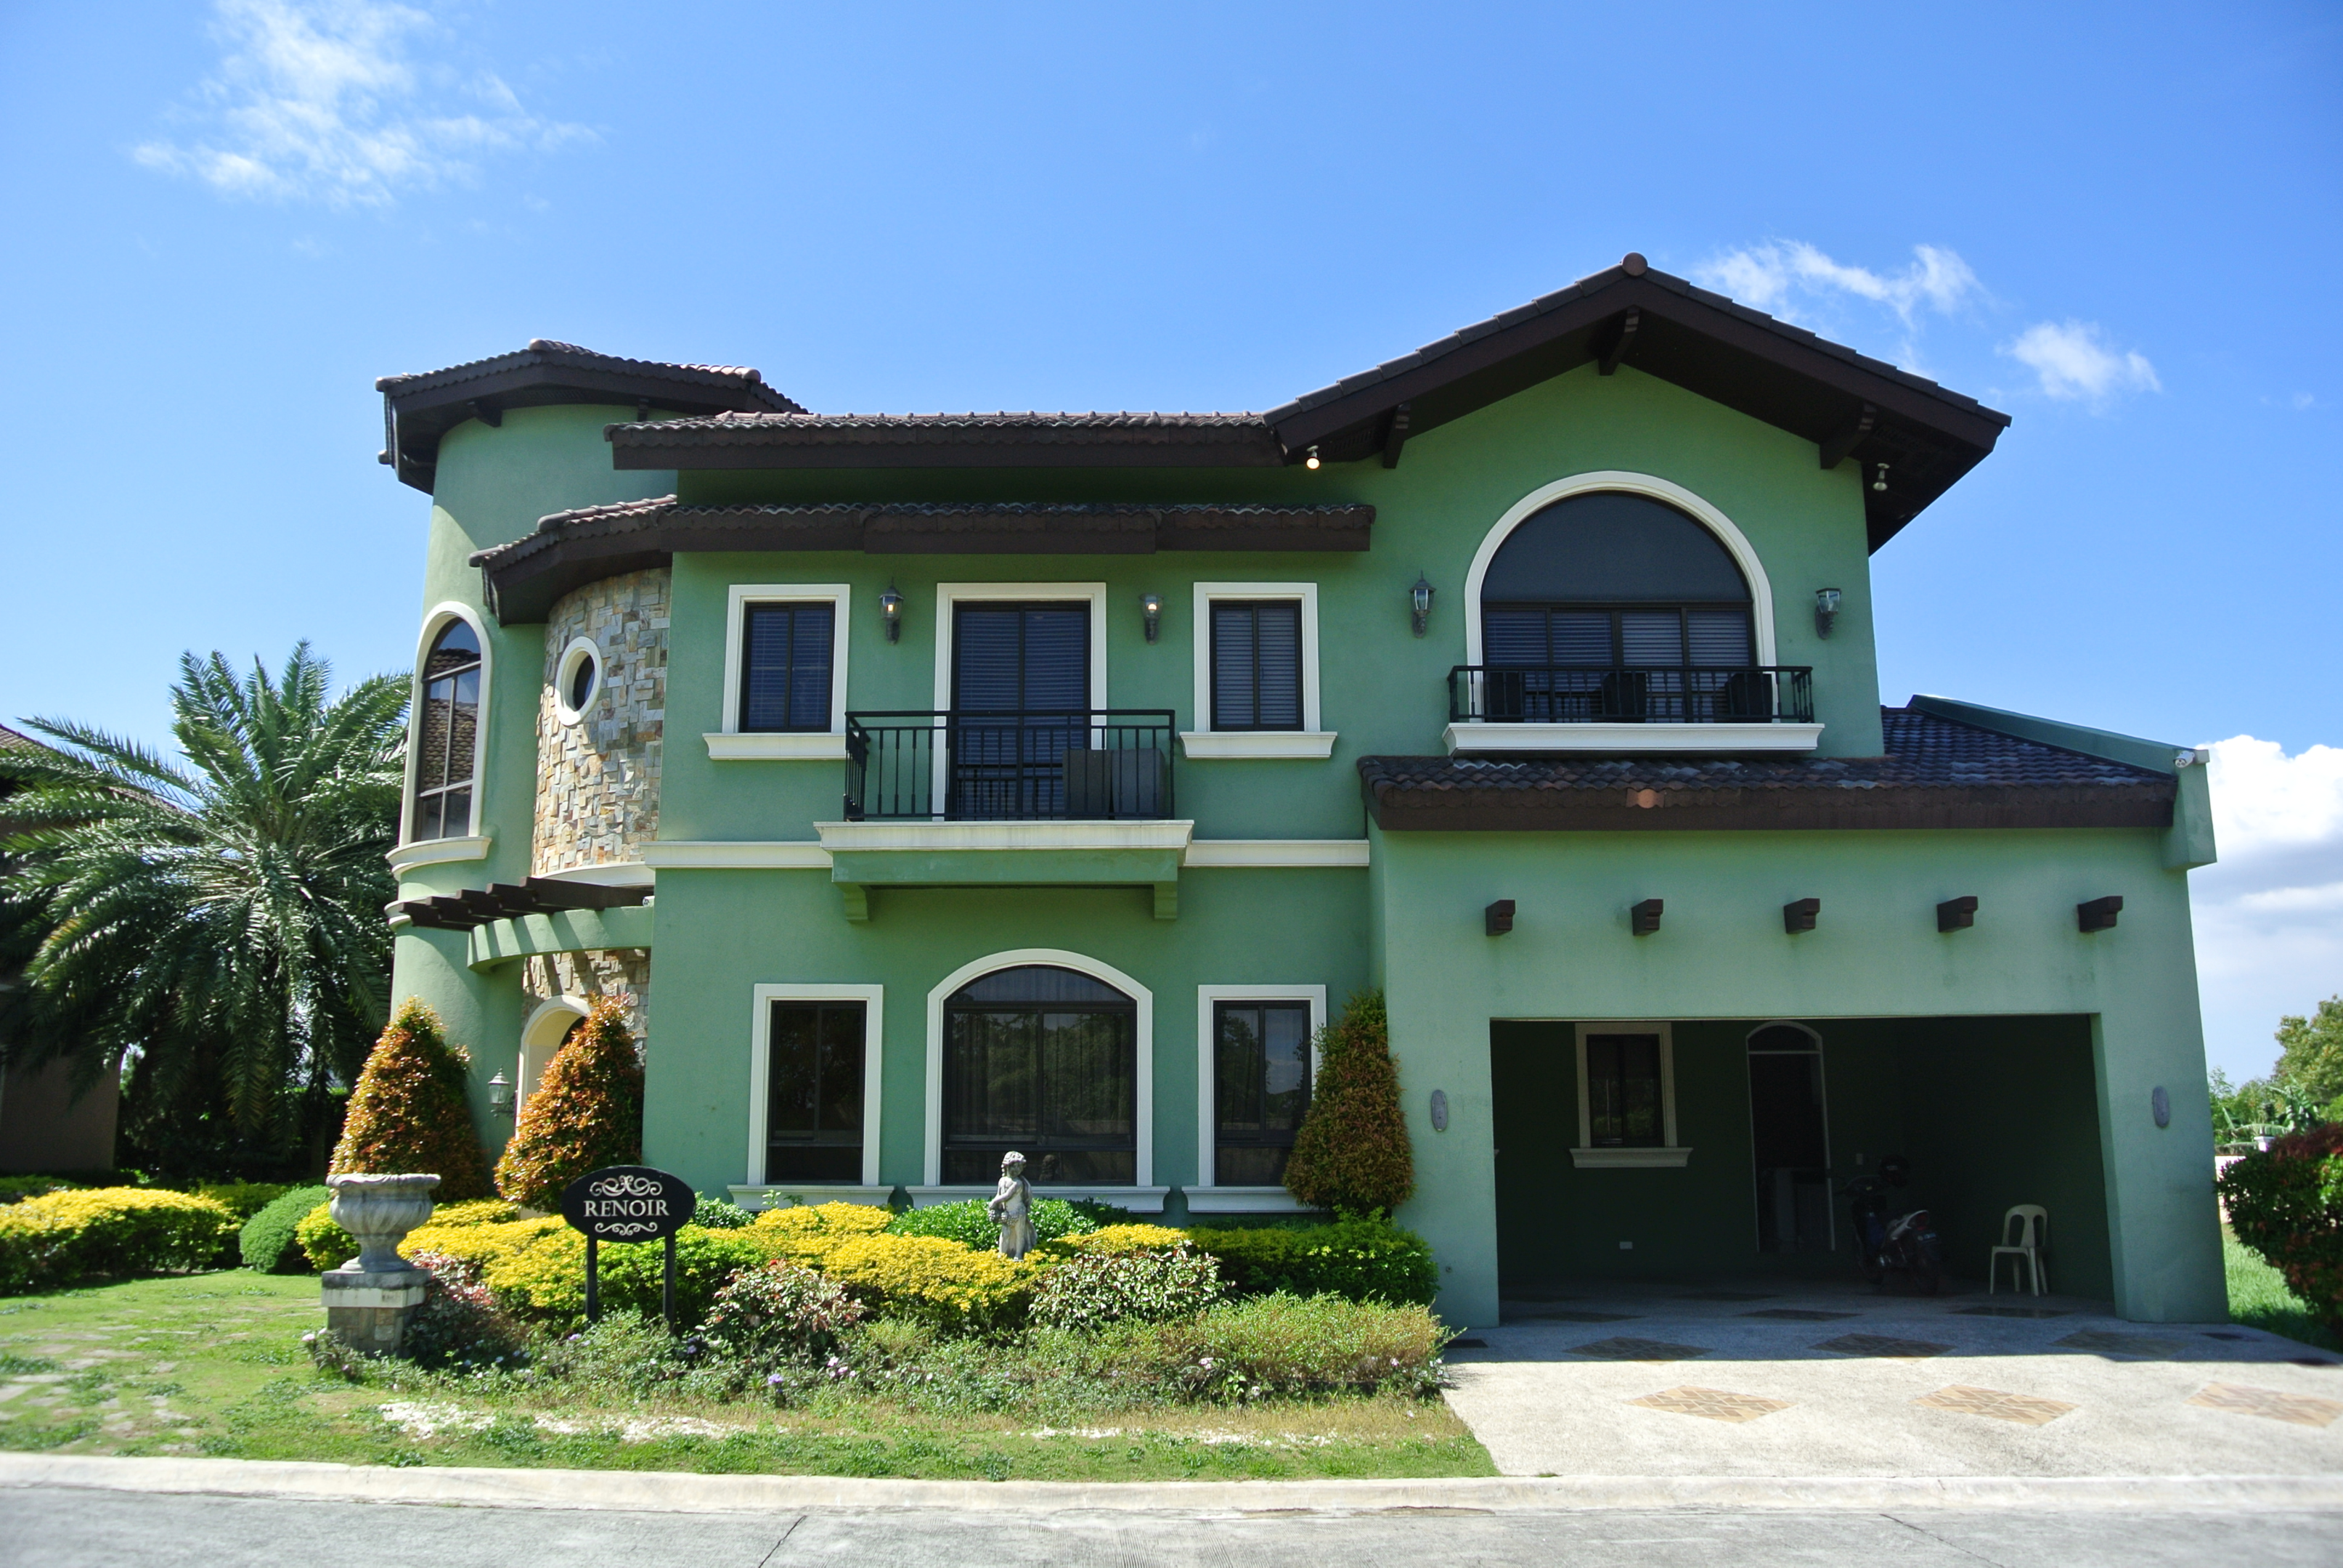 planning a home renovation, ofw property investment, investment for ofw, ofw investment